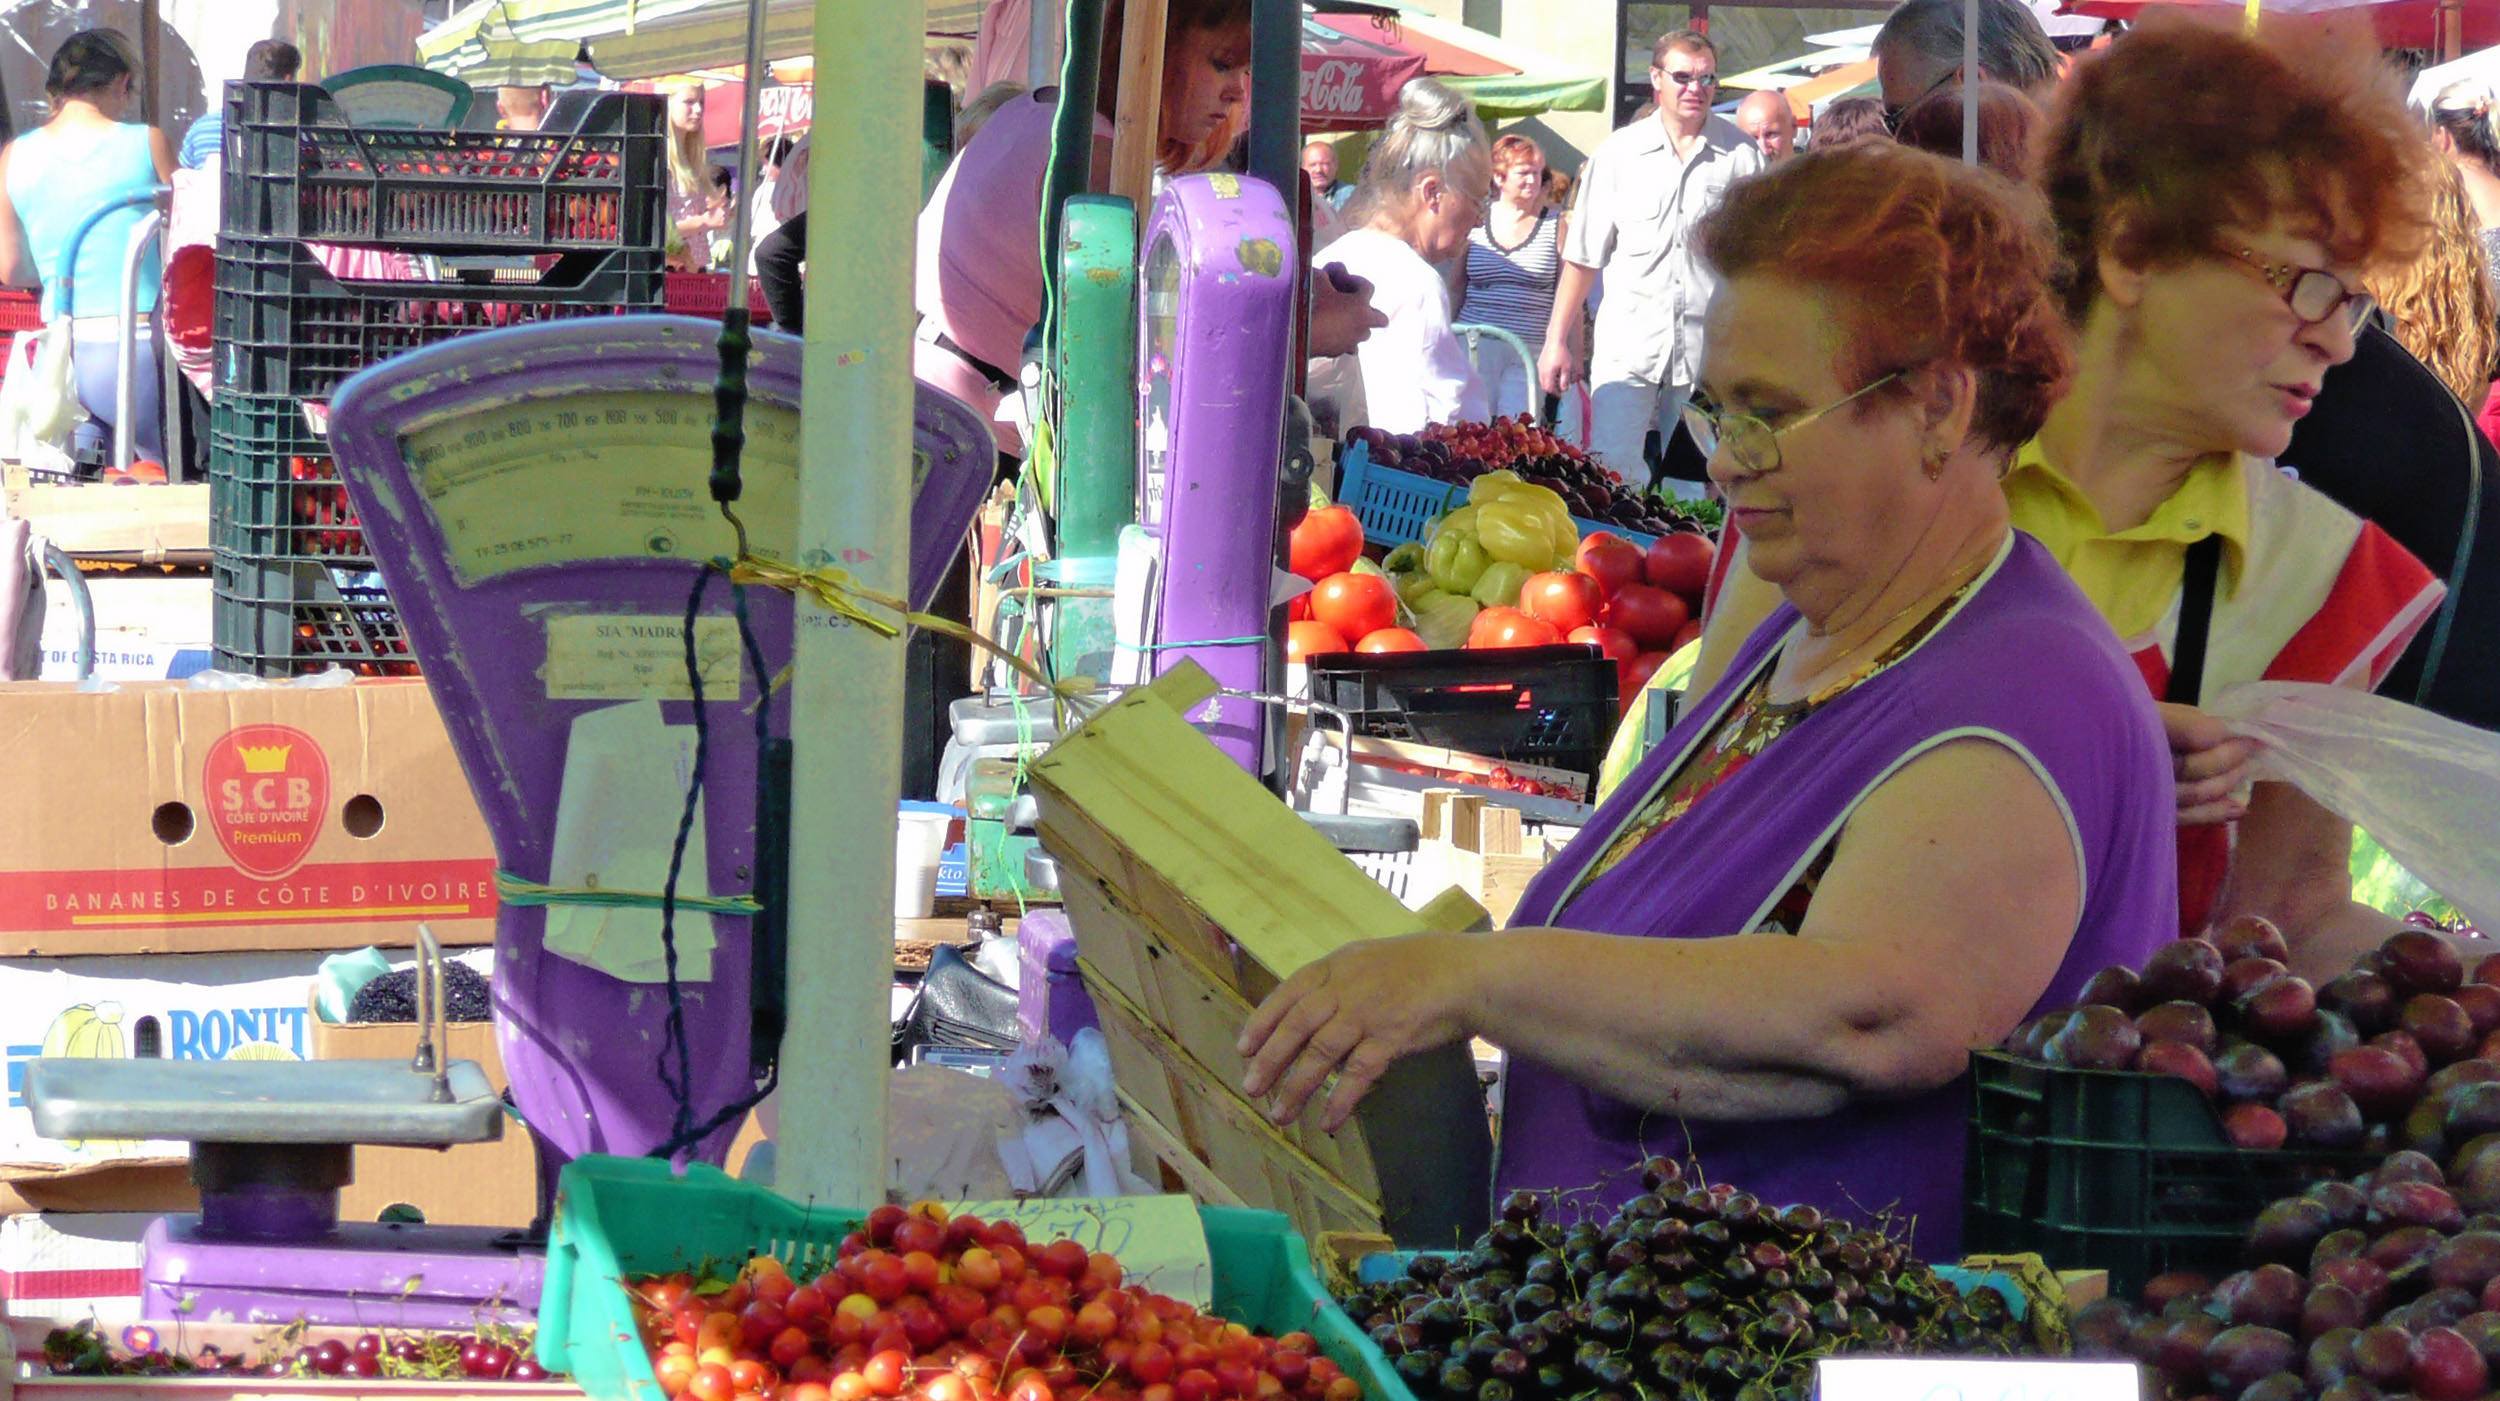 Woman selling berries at a market in Riga Latvia